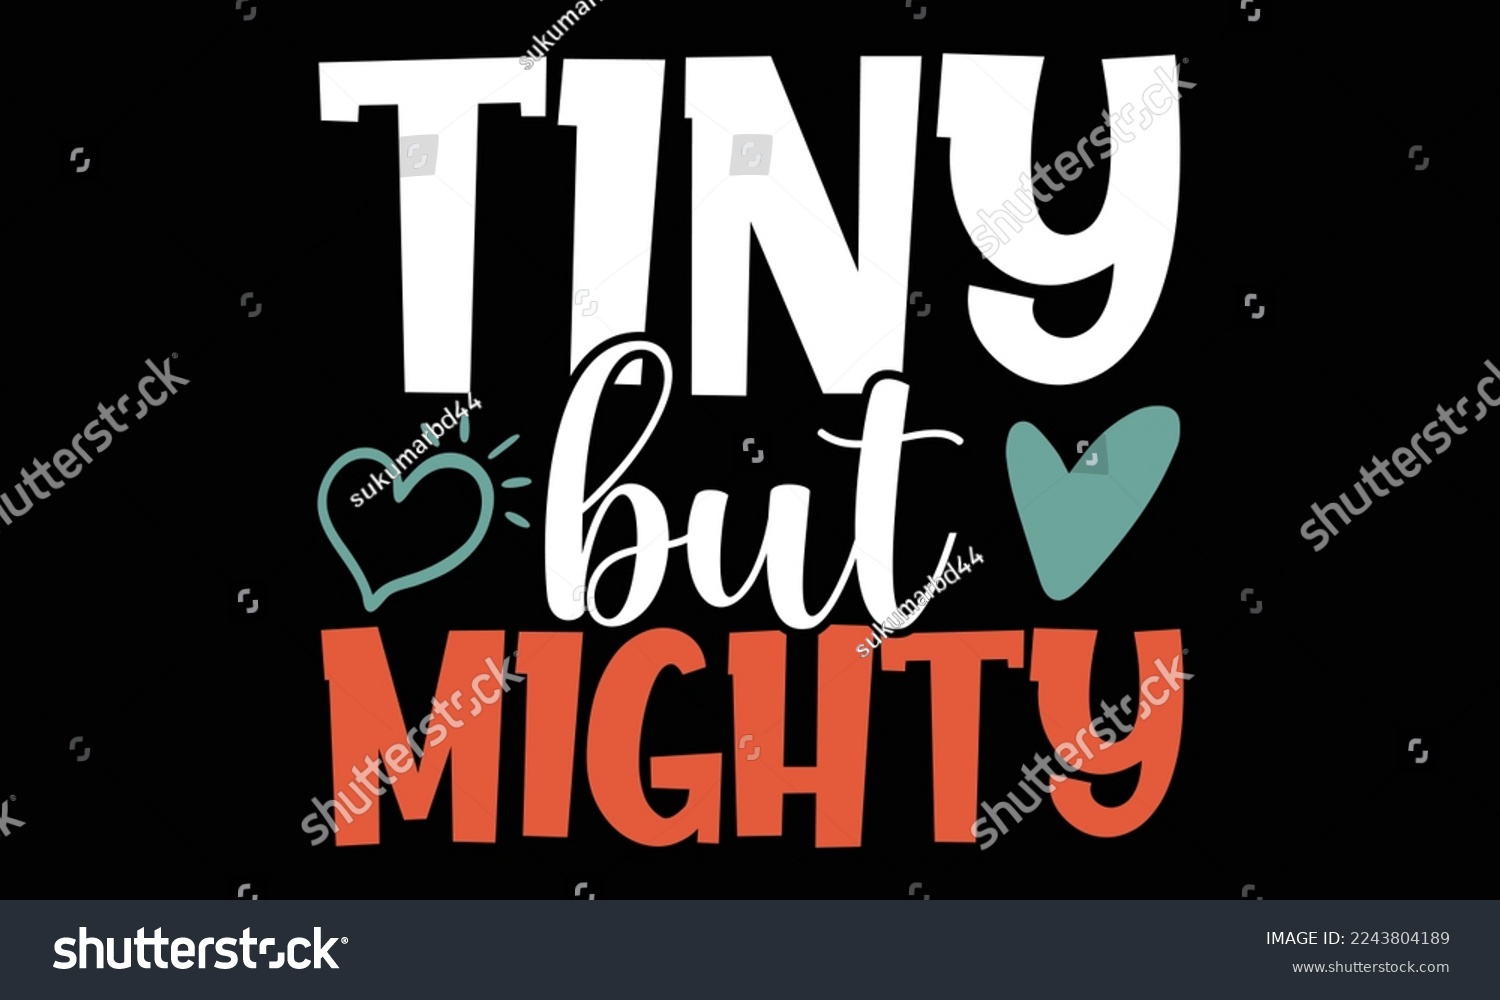 SVG of Tiny But Mighty - New Born Baby Hand drawn vintage illustration with hand-lettering and decoration elements, prints on t-shirts and bags, svg, posters, cards   svg